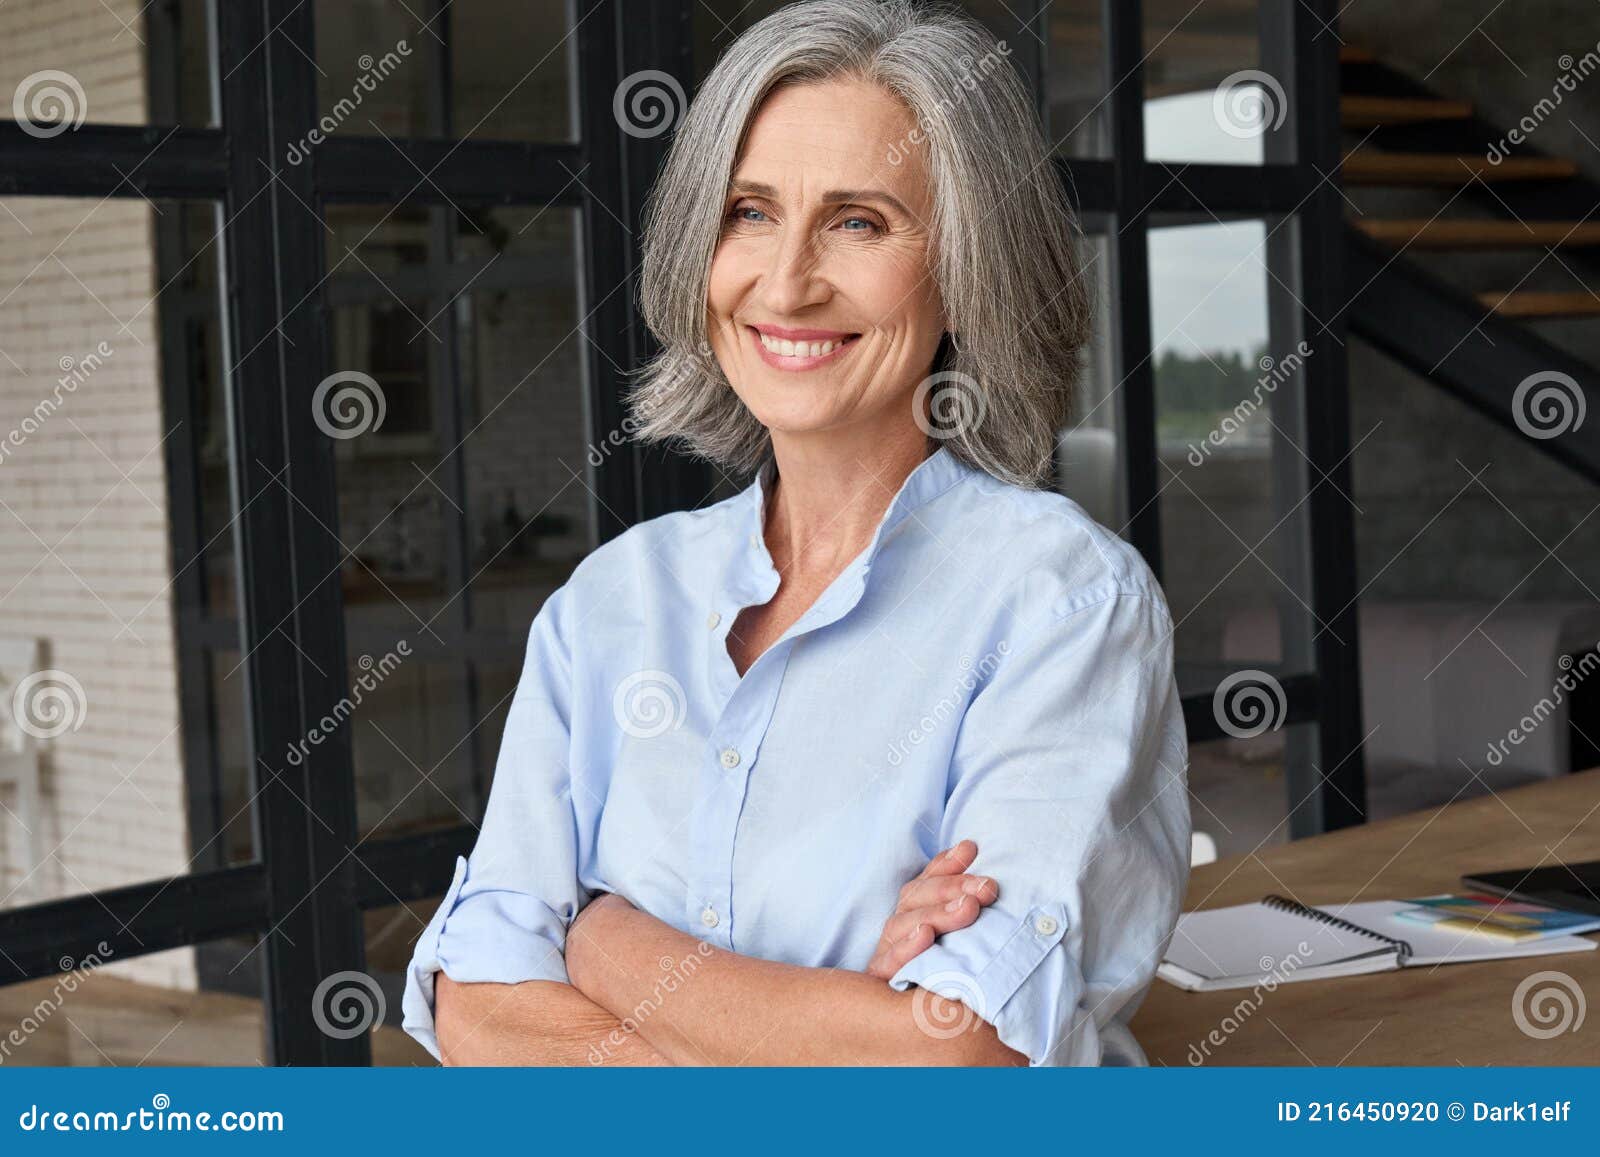 portrait of smiling business woman standing in home office.